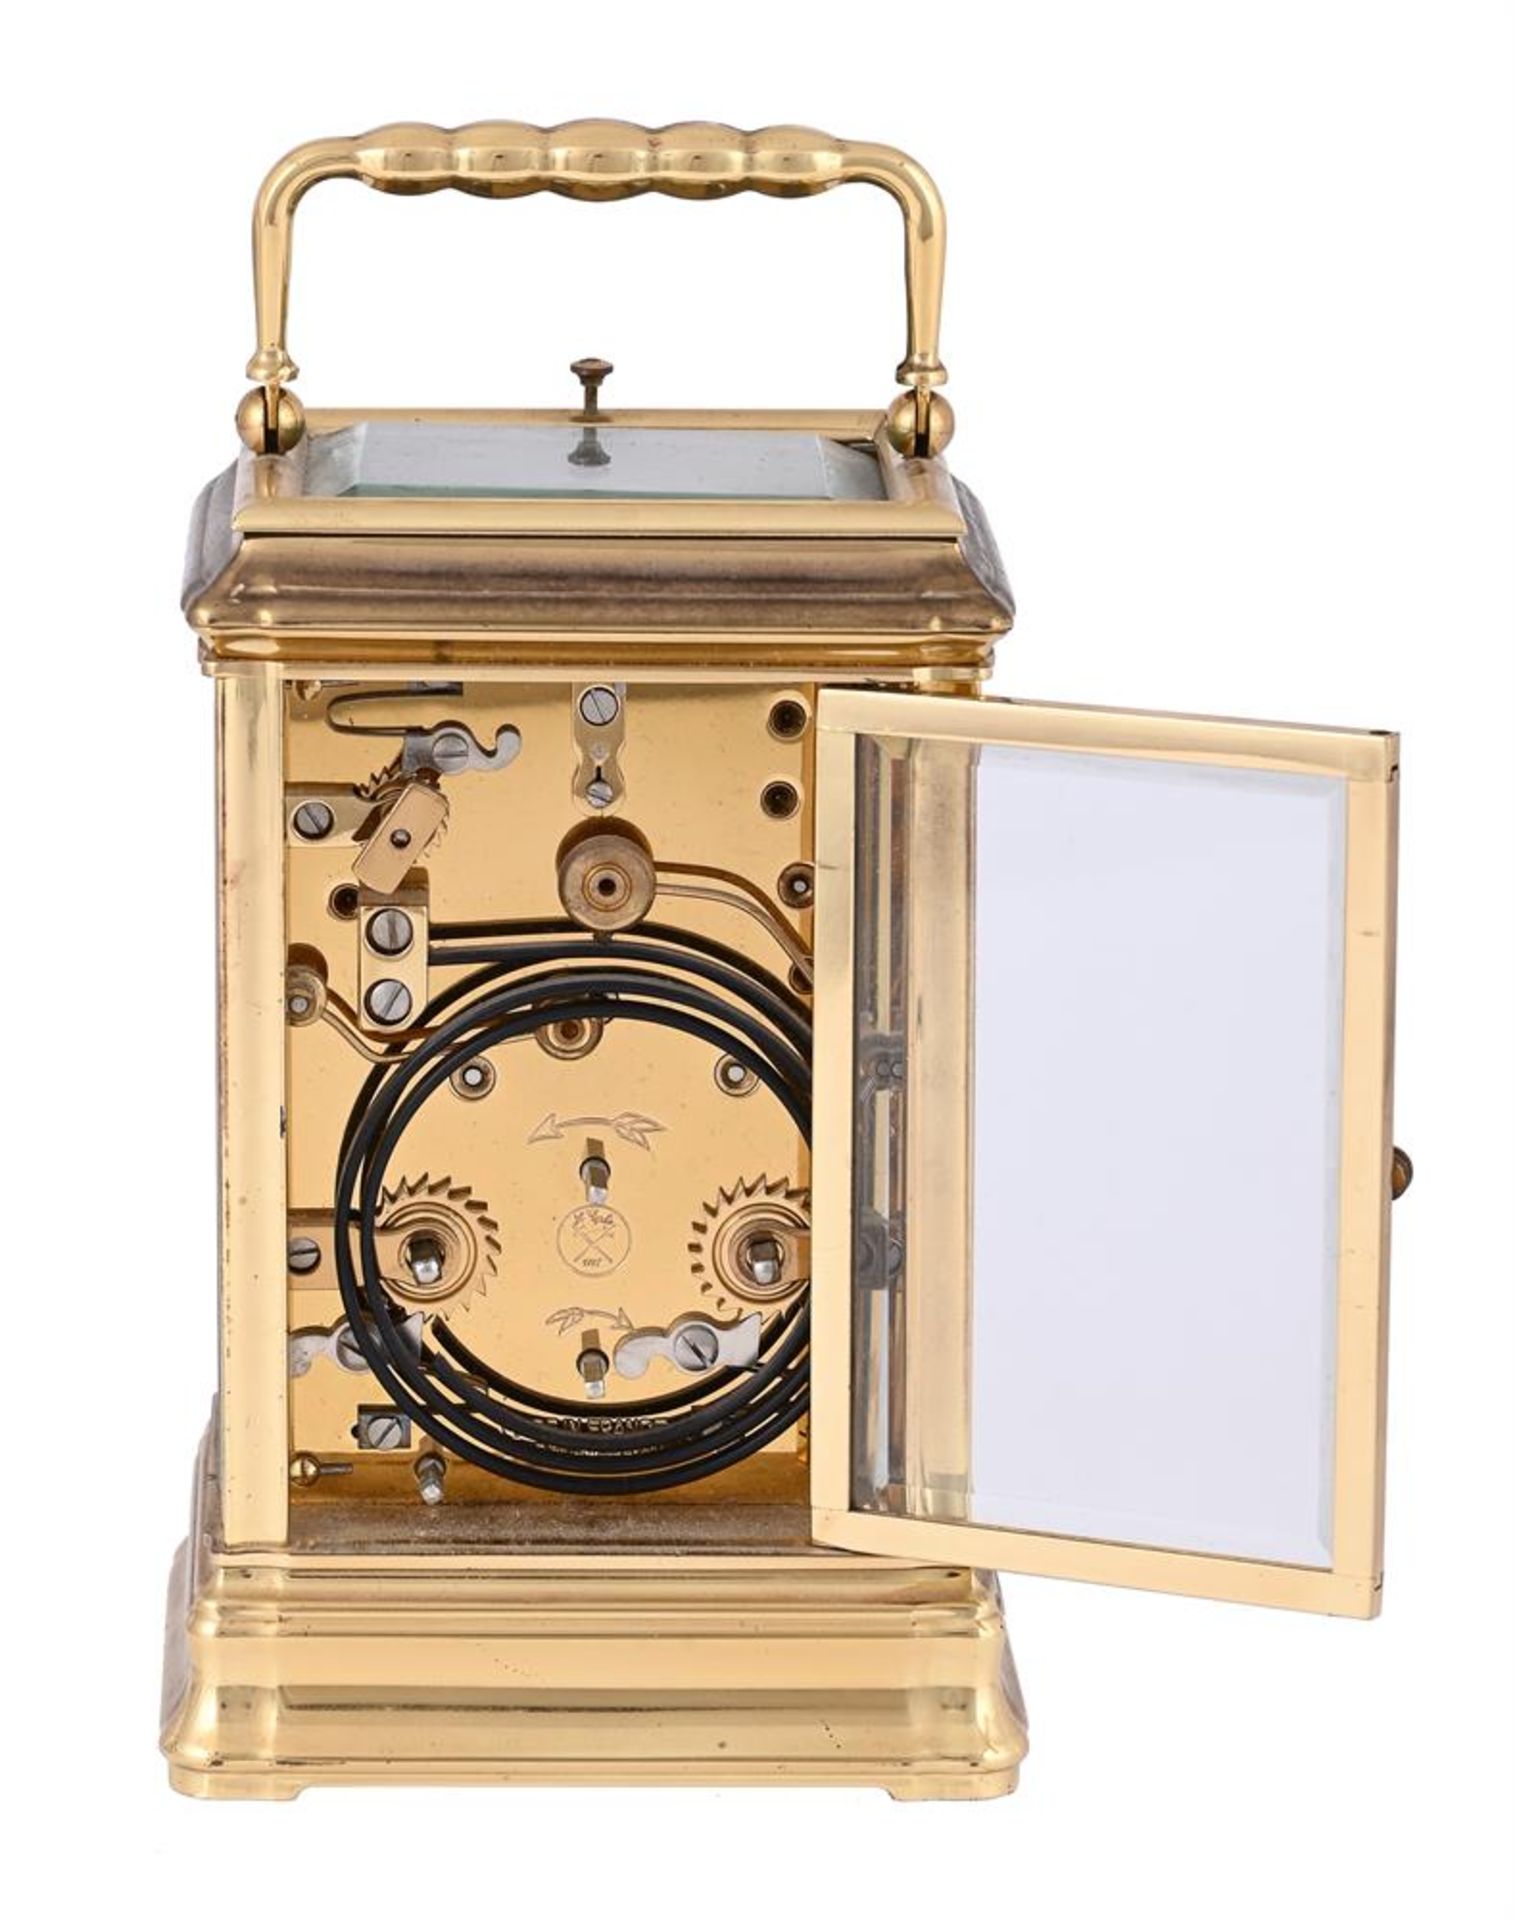 A FRENCH/SWISS LAQUERED BRASS GORGE CASED CALENDAR CARRIAGE CLOCK WITH PUSH-BUTTON REPEAT AND ALARM - Image 2 of 3